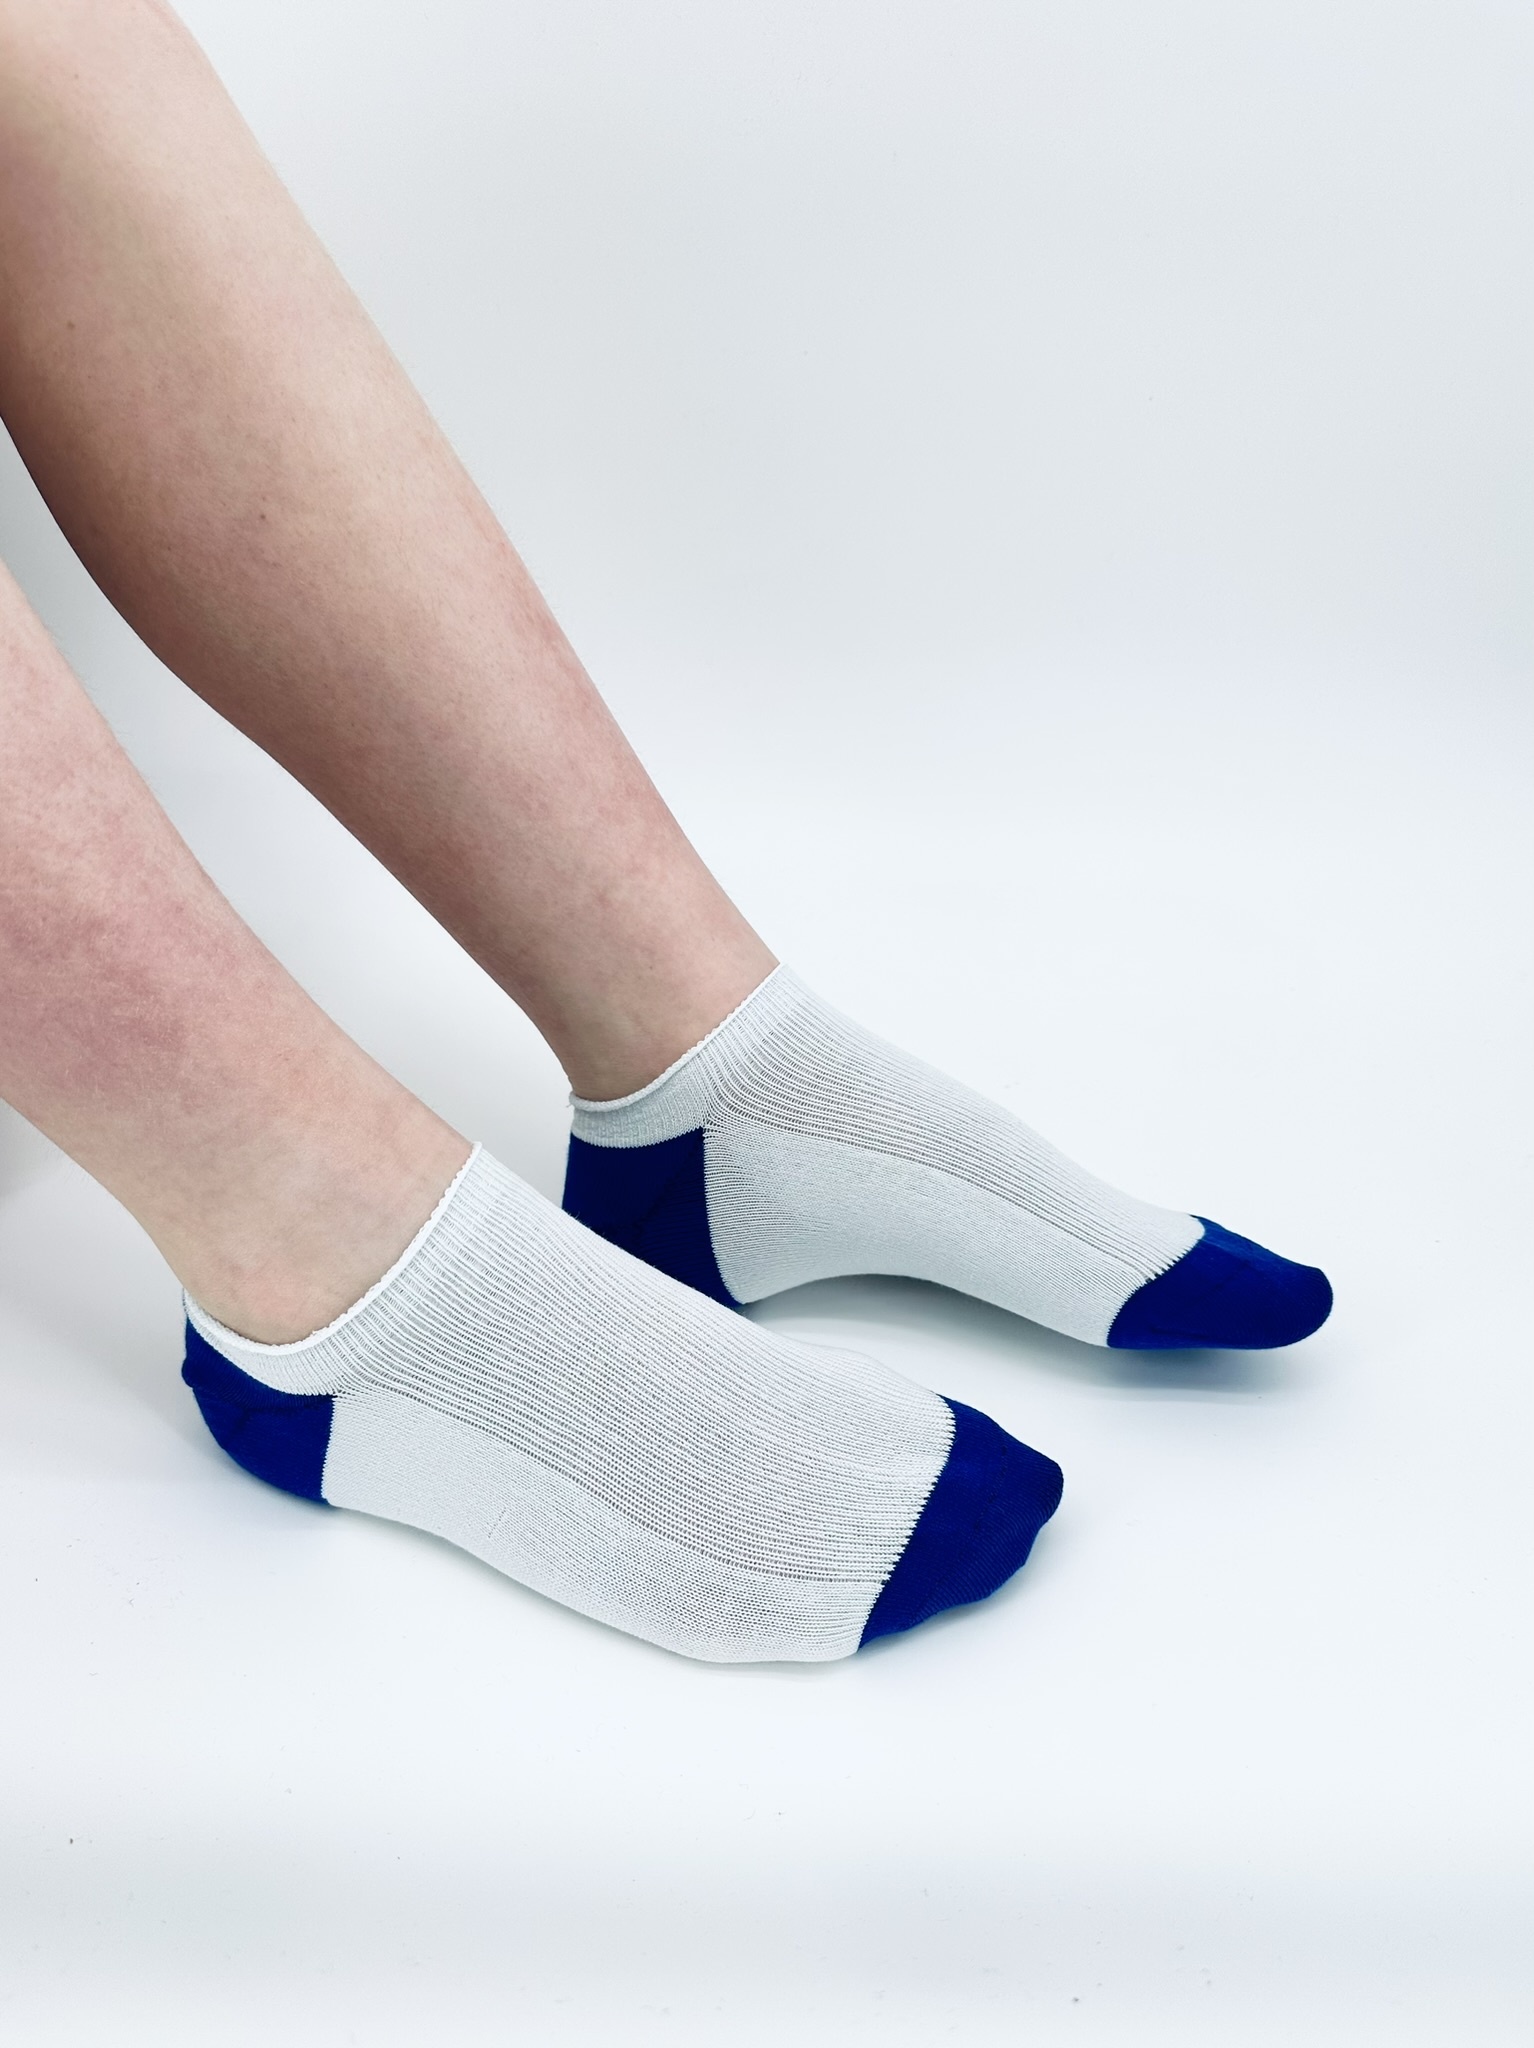 SNEAKER Socks, Pure Seamless Feel Without Pilling. Size 27 - 46. - SAM,  Sensory & More